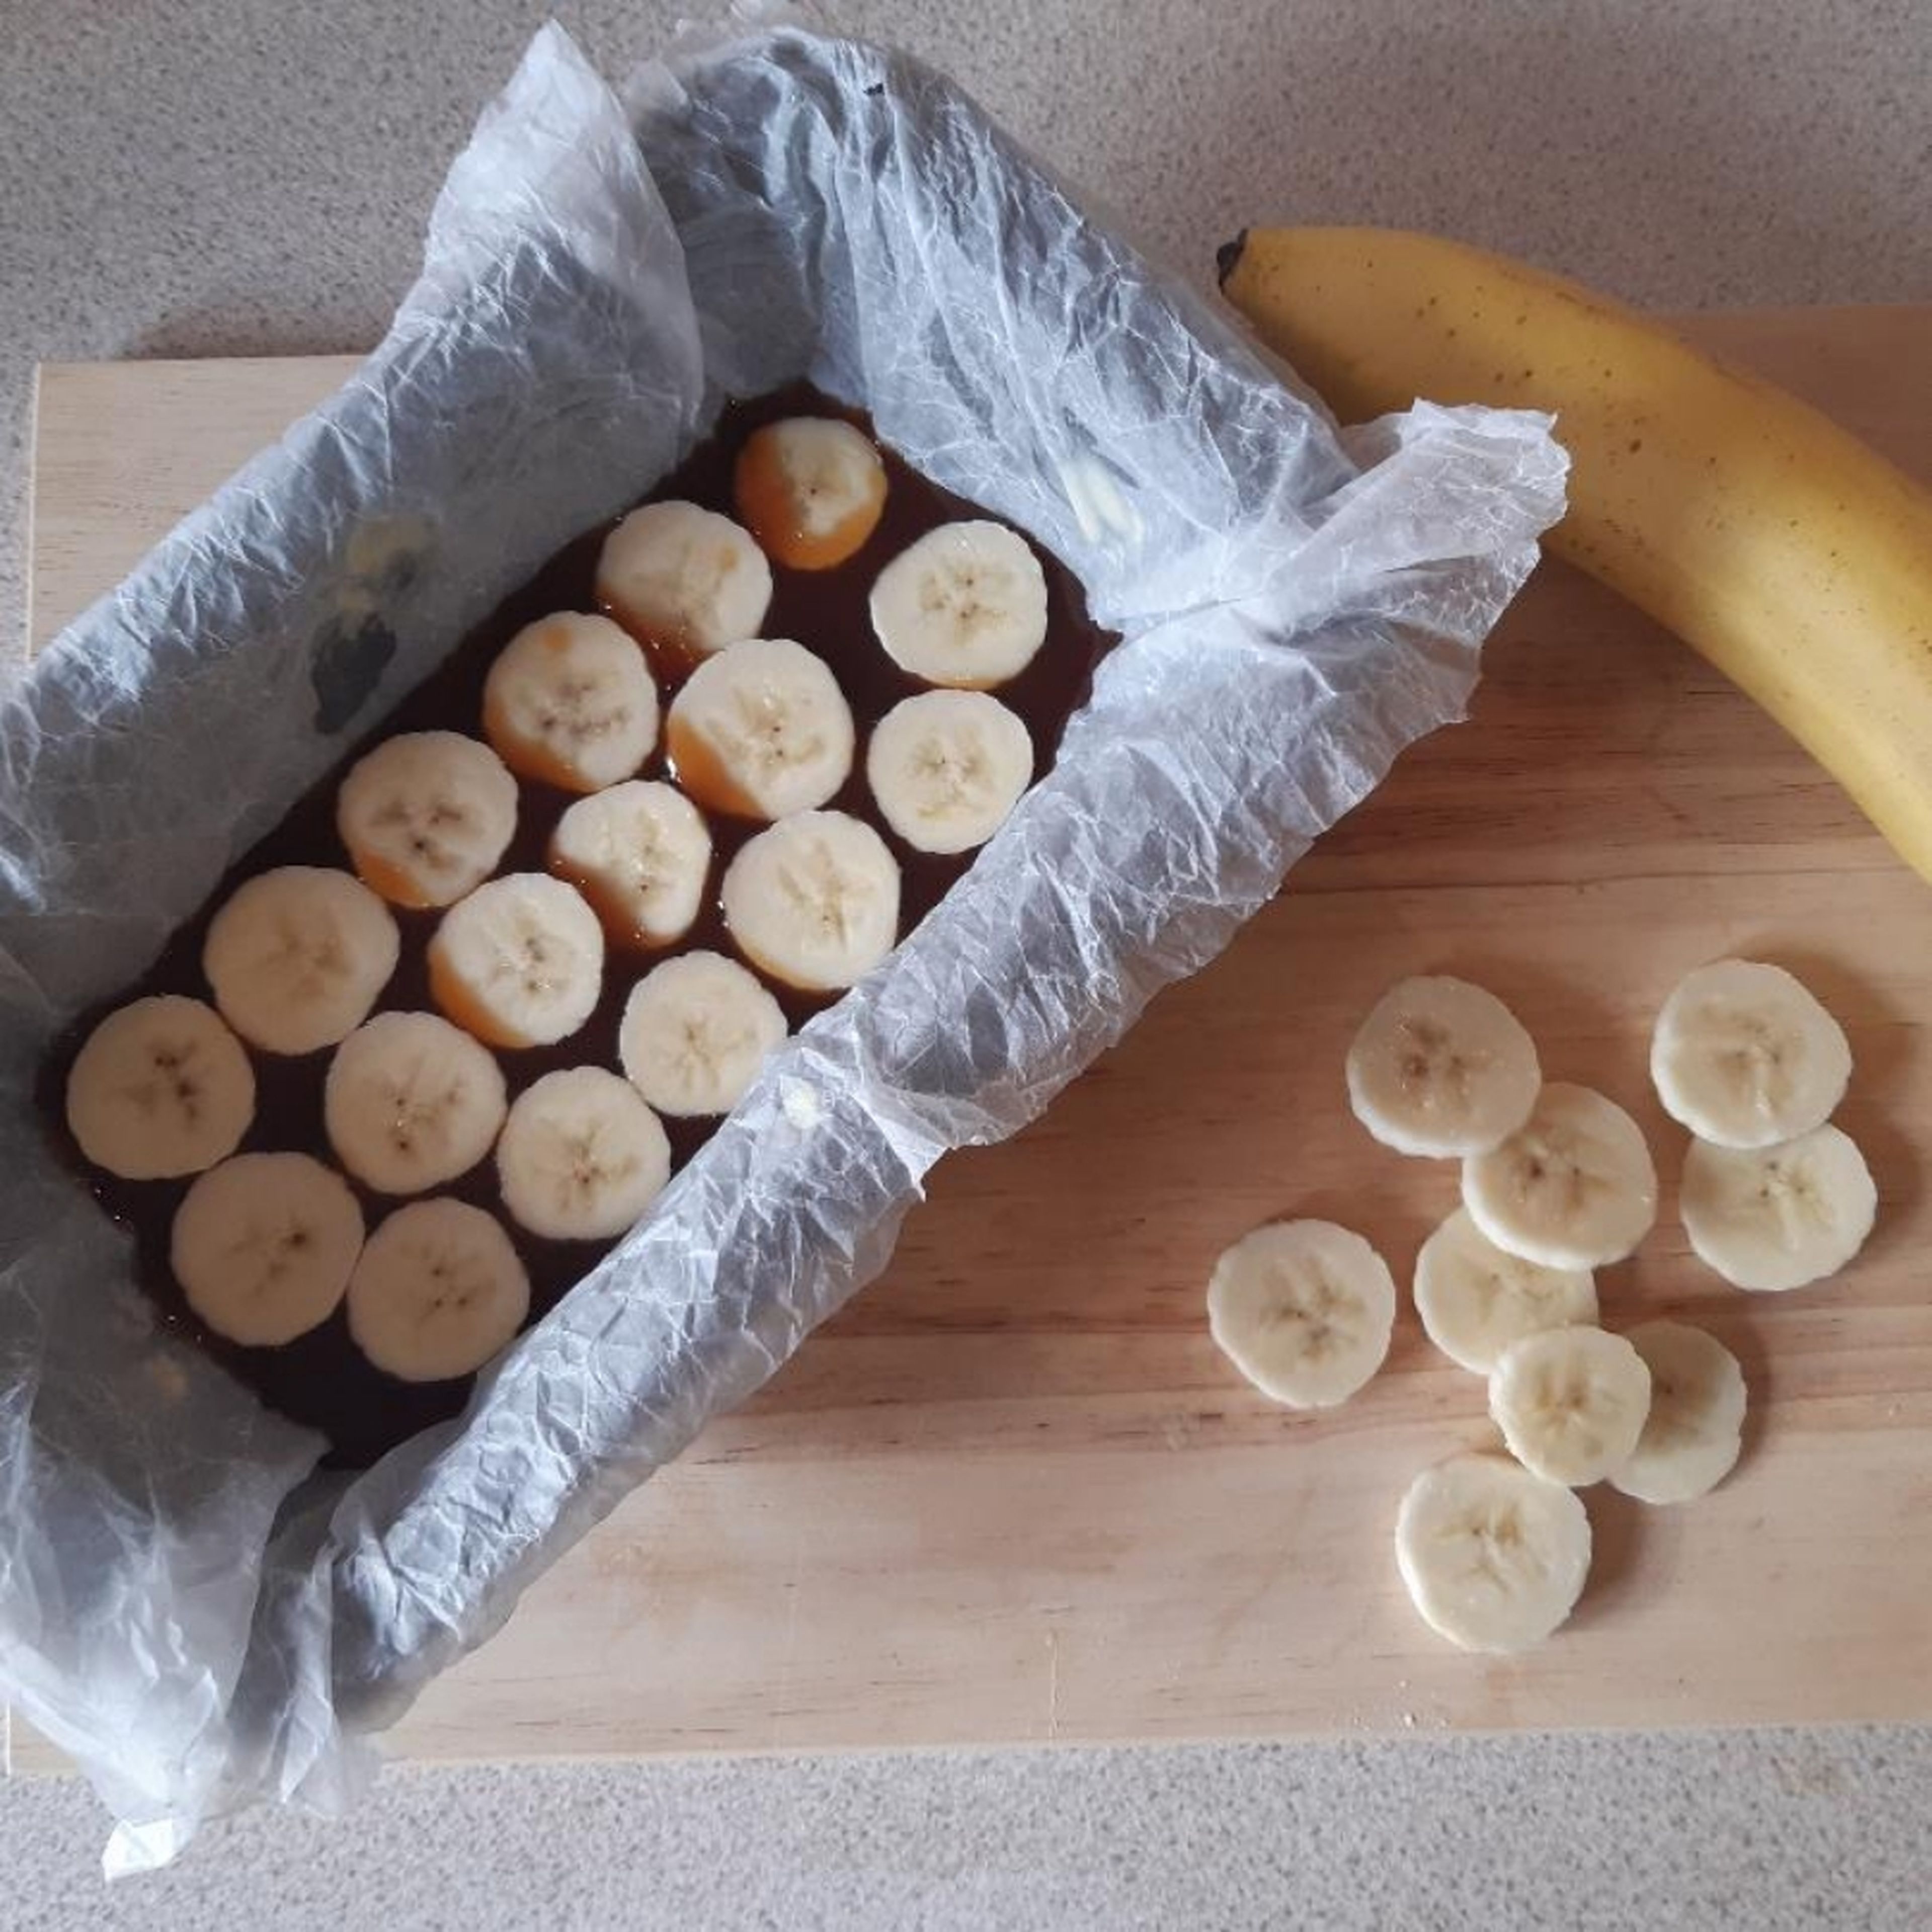 Whilst the caramel cools a little, line the loaf tin with parchment paper and then chop the ripe banana into circles. Pour around two thirds of the caramel into the bottom of the lined tin and layer the banana on top. Set the rest of the caramel aside for serving later.